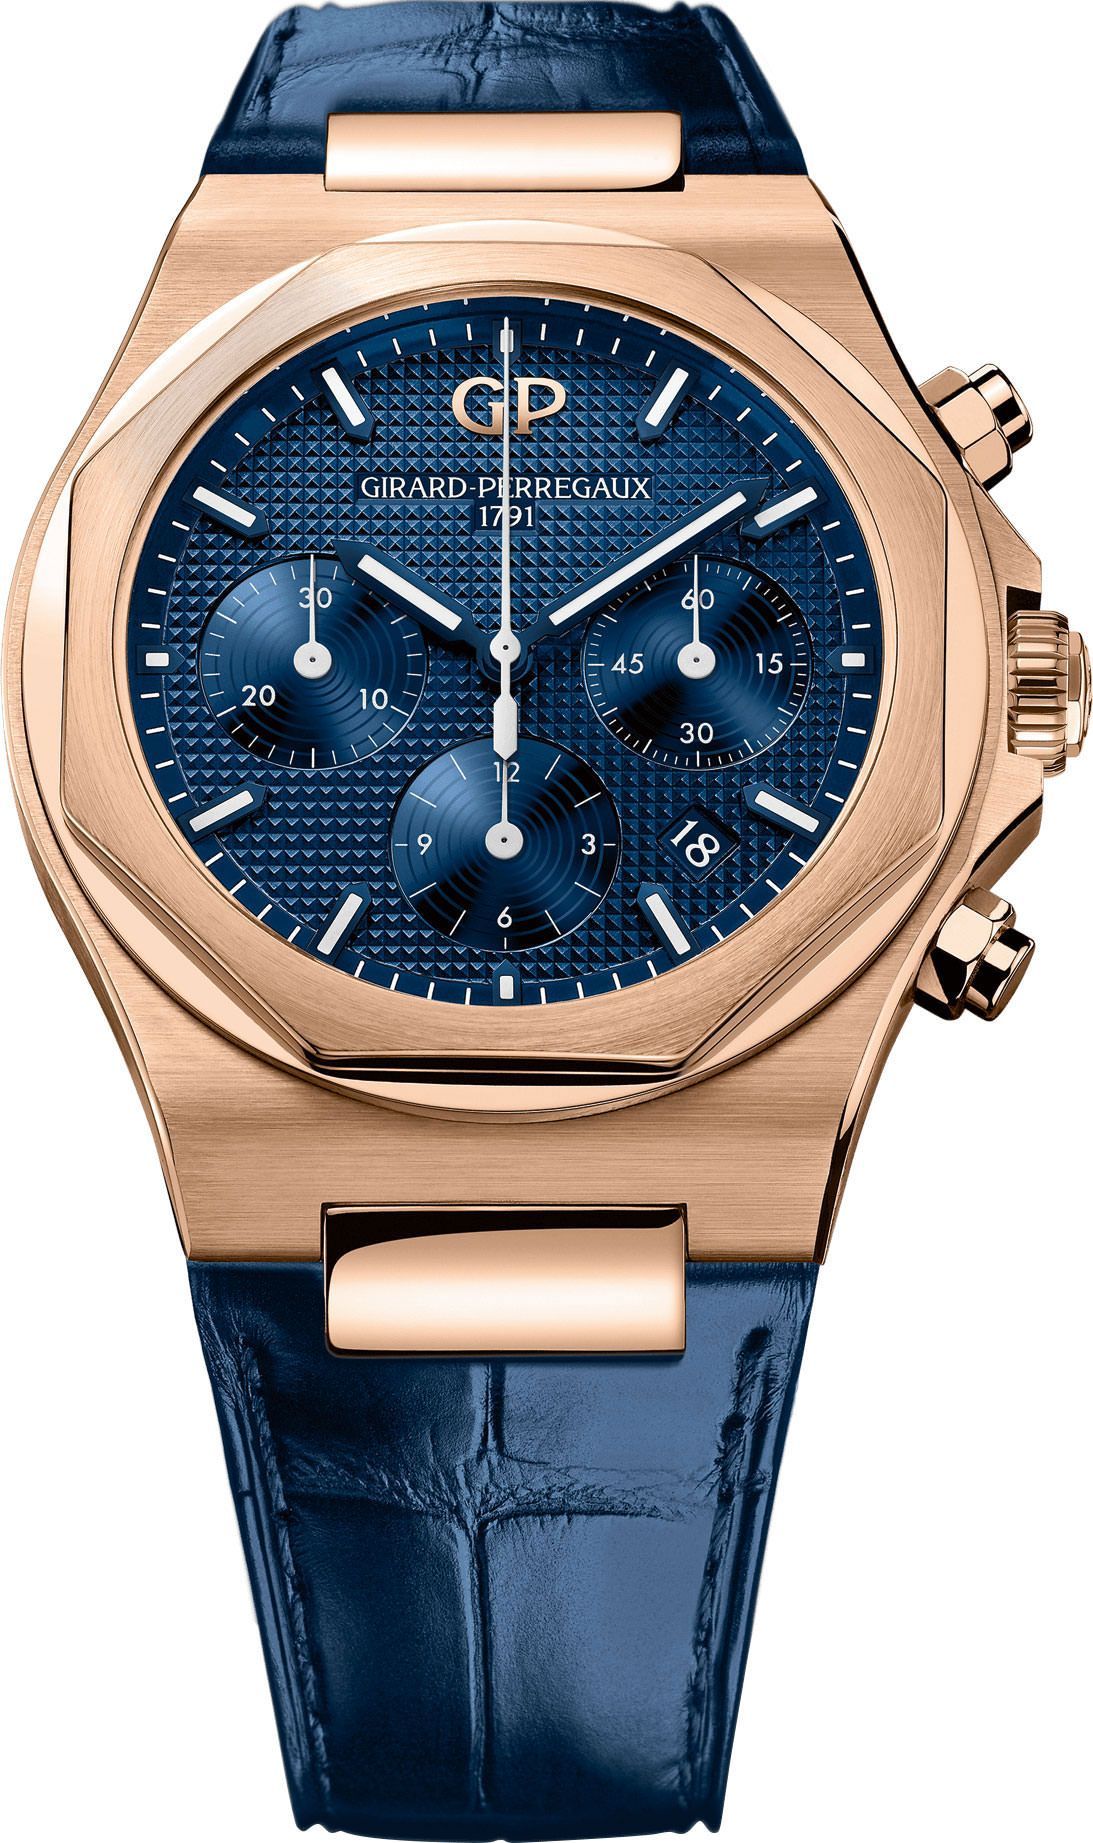 Girard-Perregaux Chronograph 42 mm Watch in Blue Dial For Men - 1